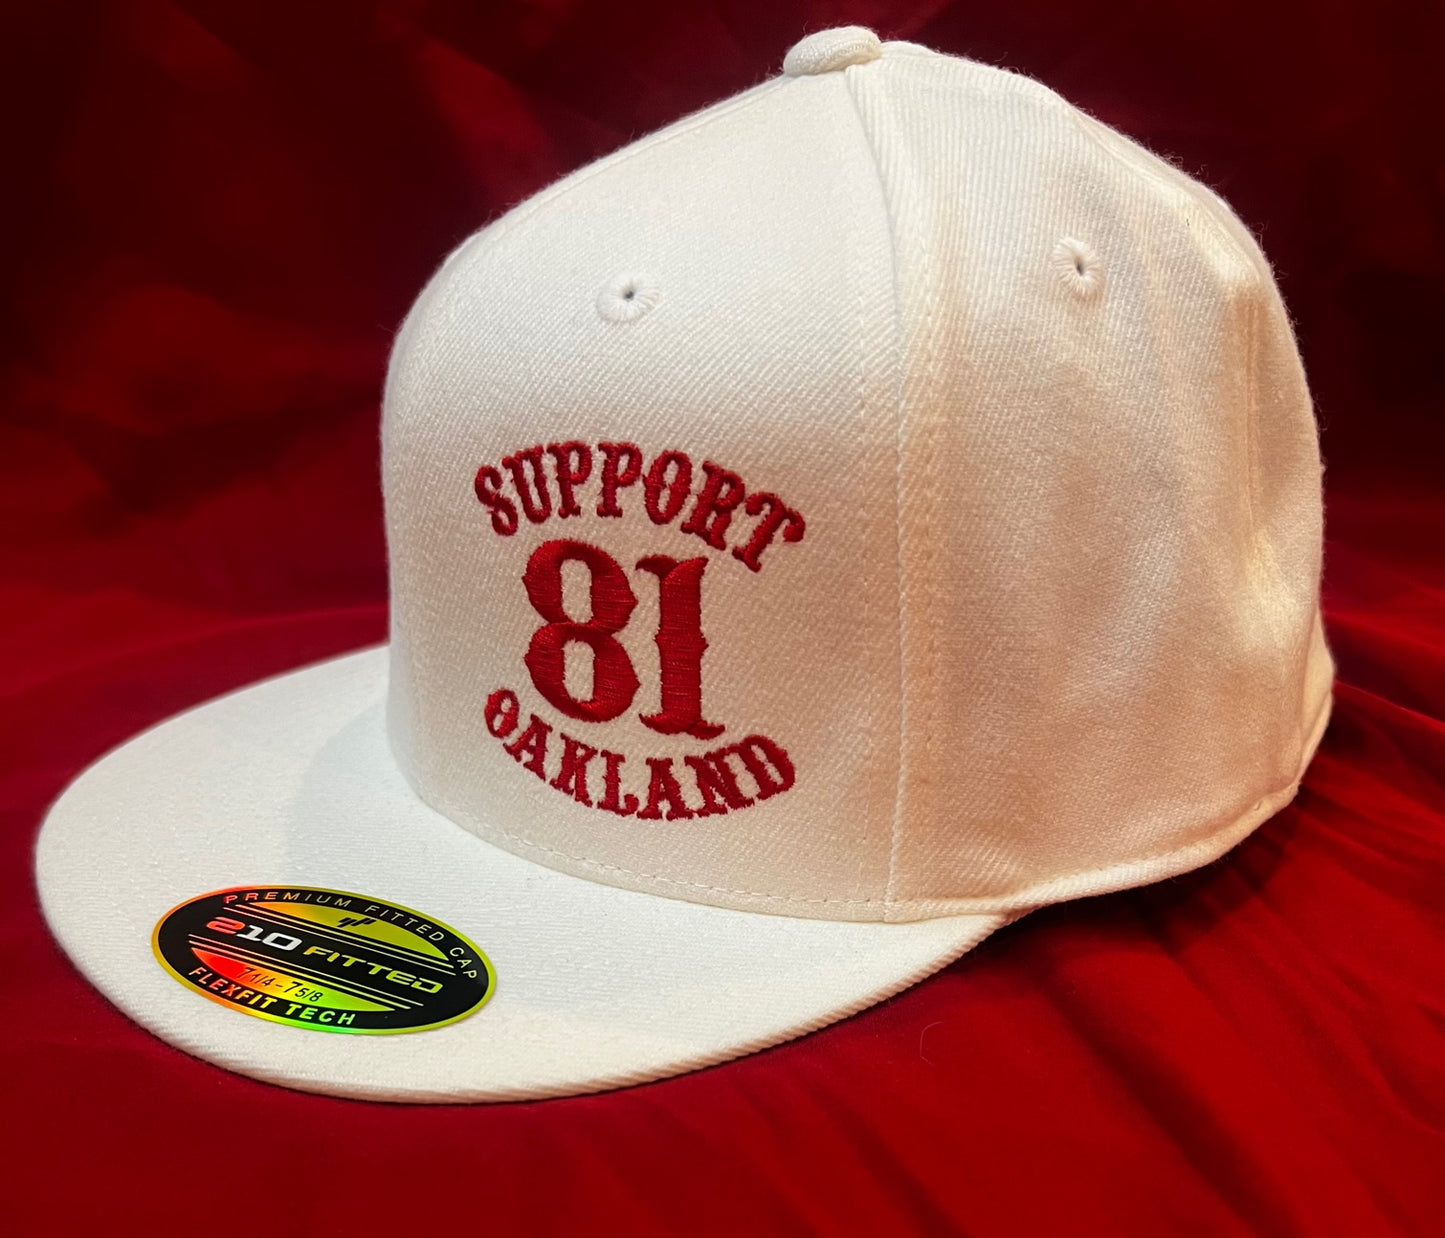 3 COLORS AVAILABLE- SUPPORT 81 OAKLAND HAT